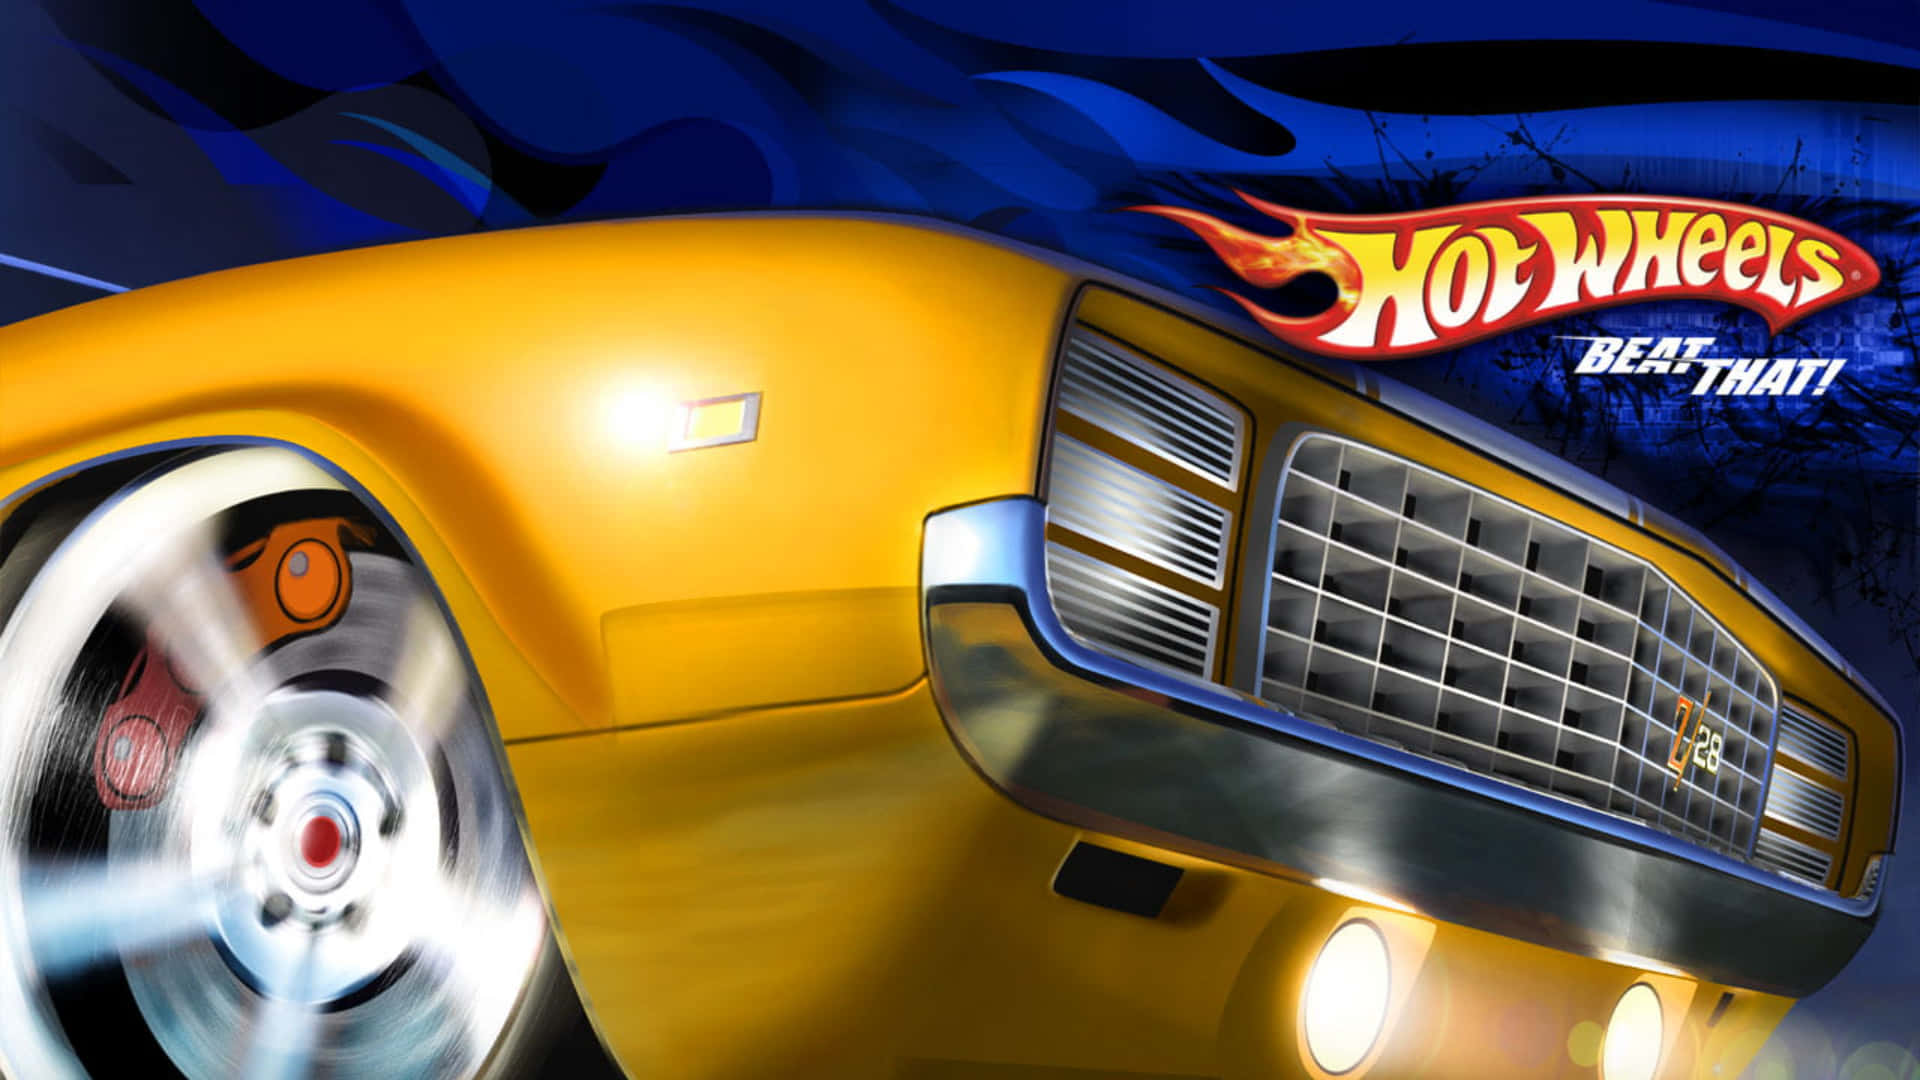 Collectors can enjoy the thrill of Hot Wheels with the newest cars from Mattel